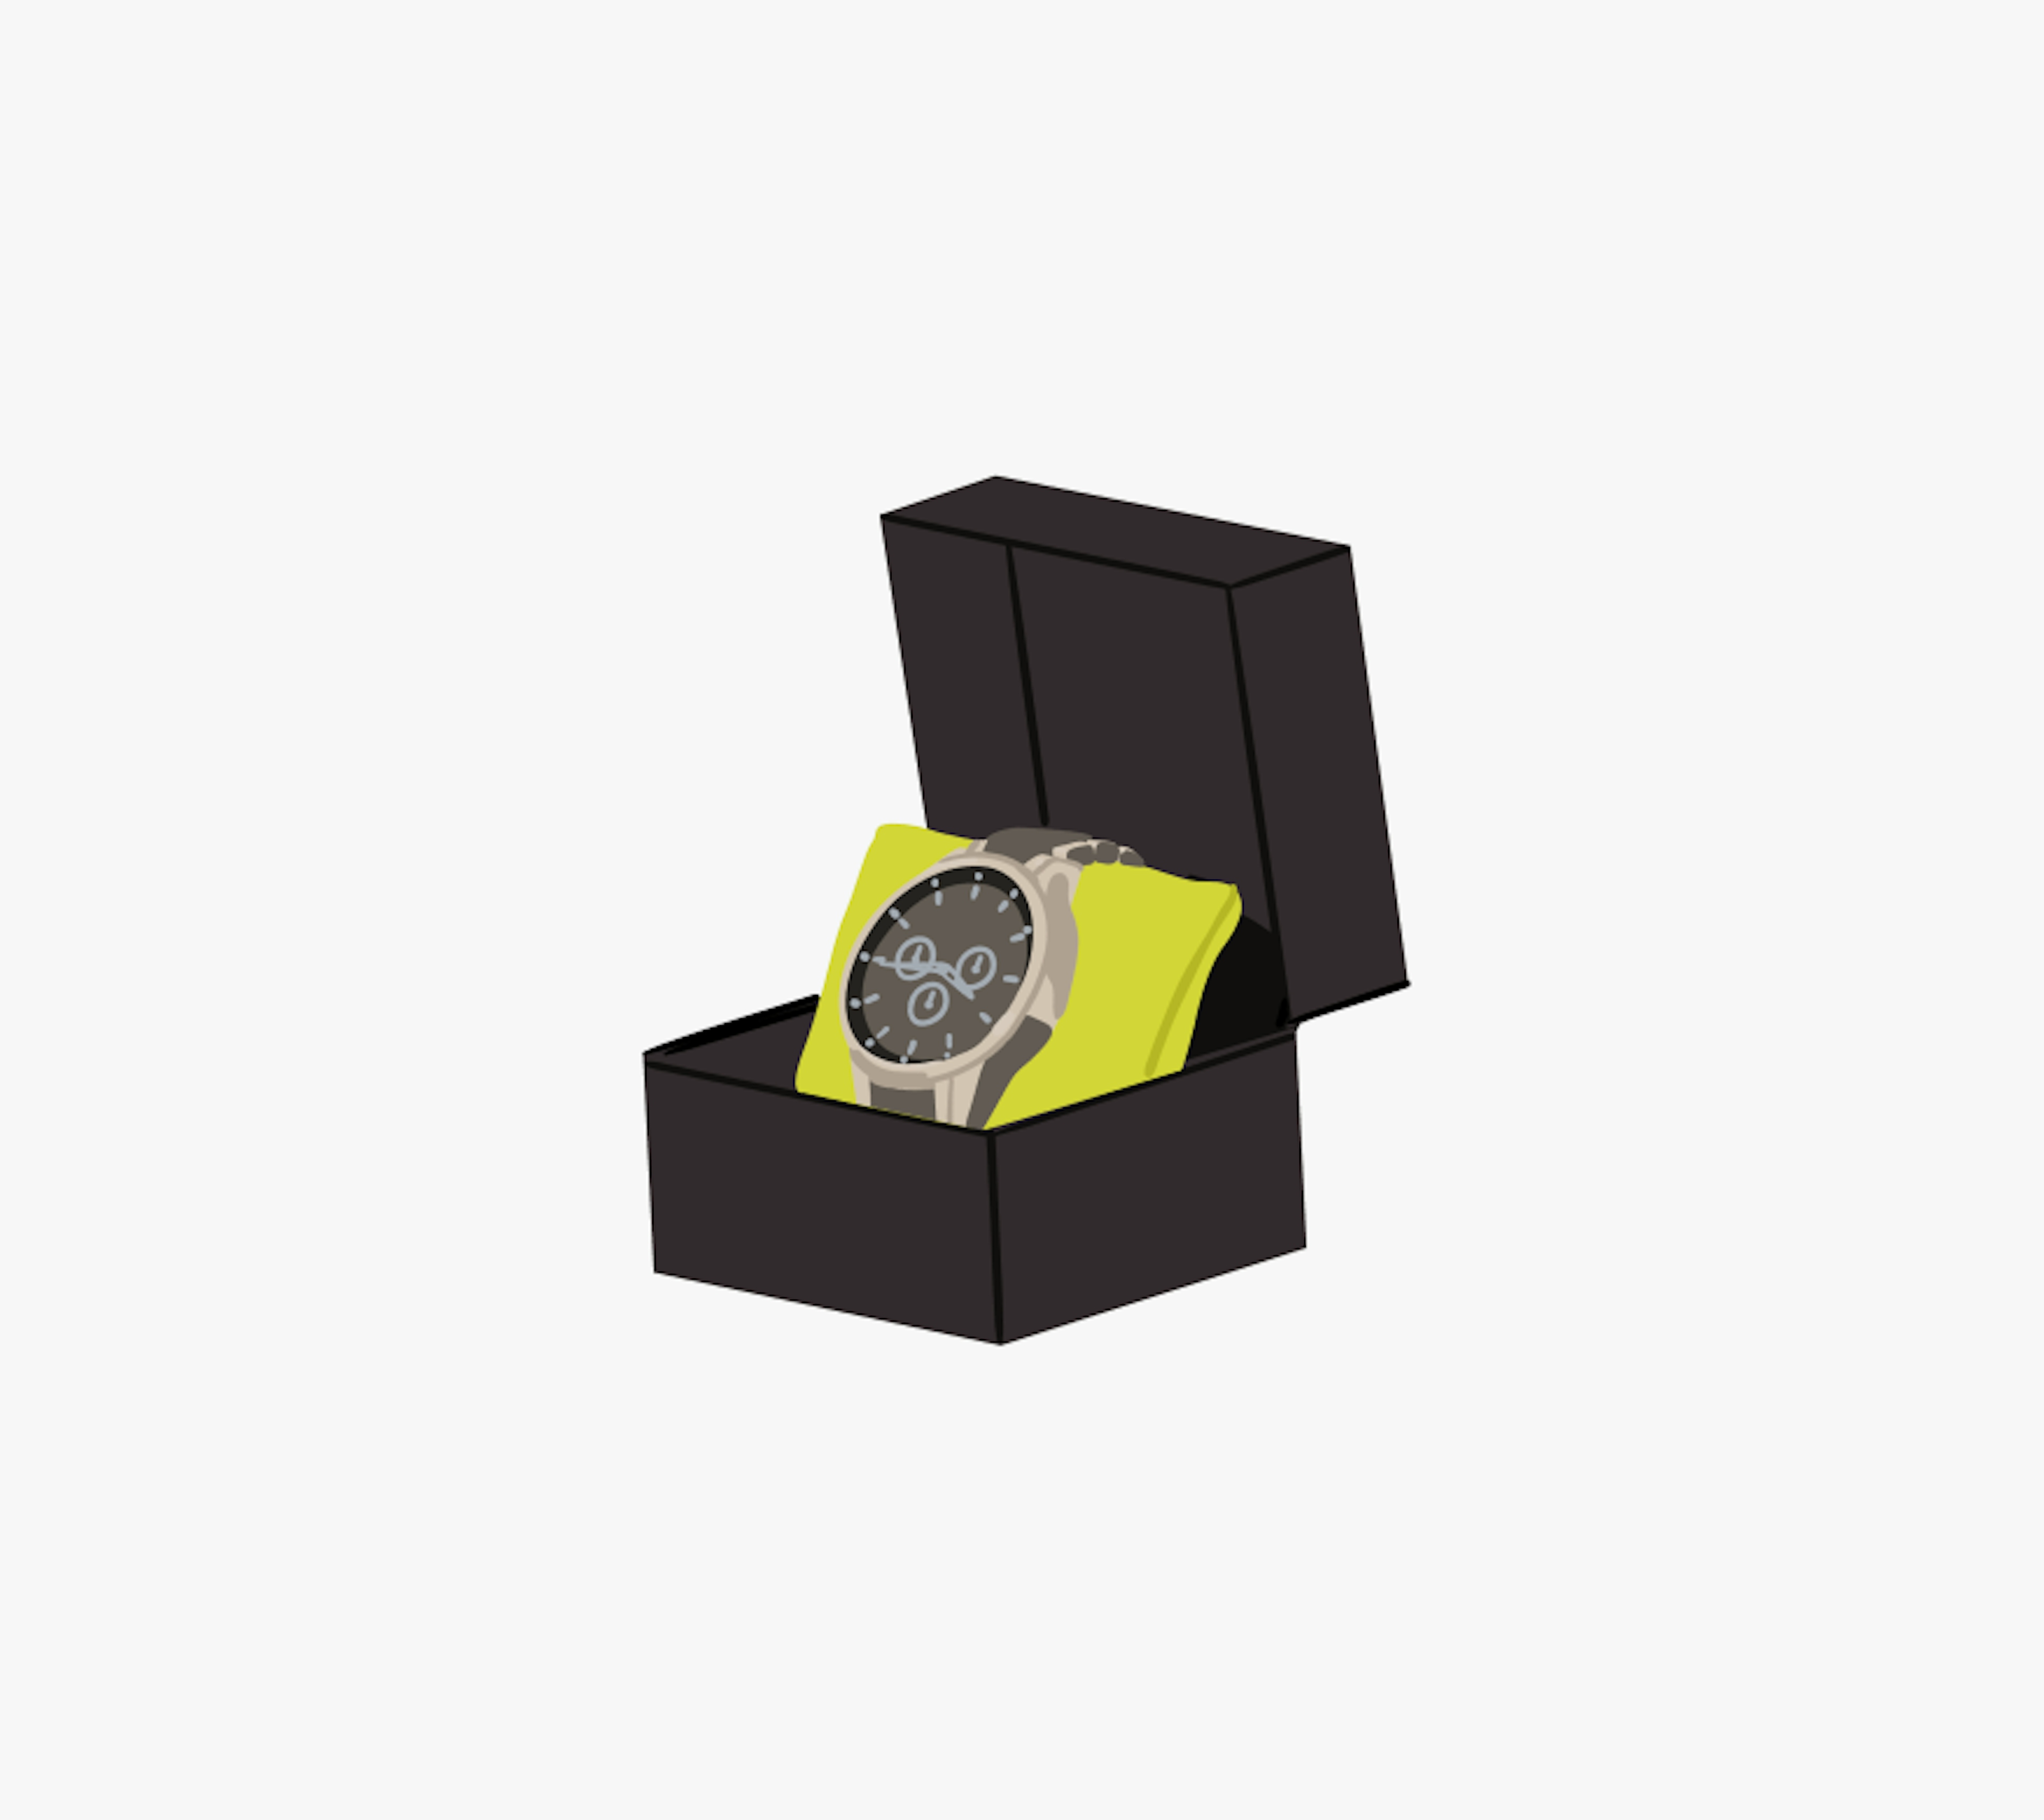 A wristwatch with a dark face and metal band is displayed on a yellow cushion inside an open black box.